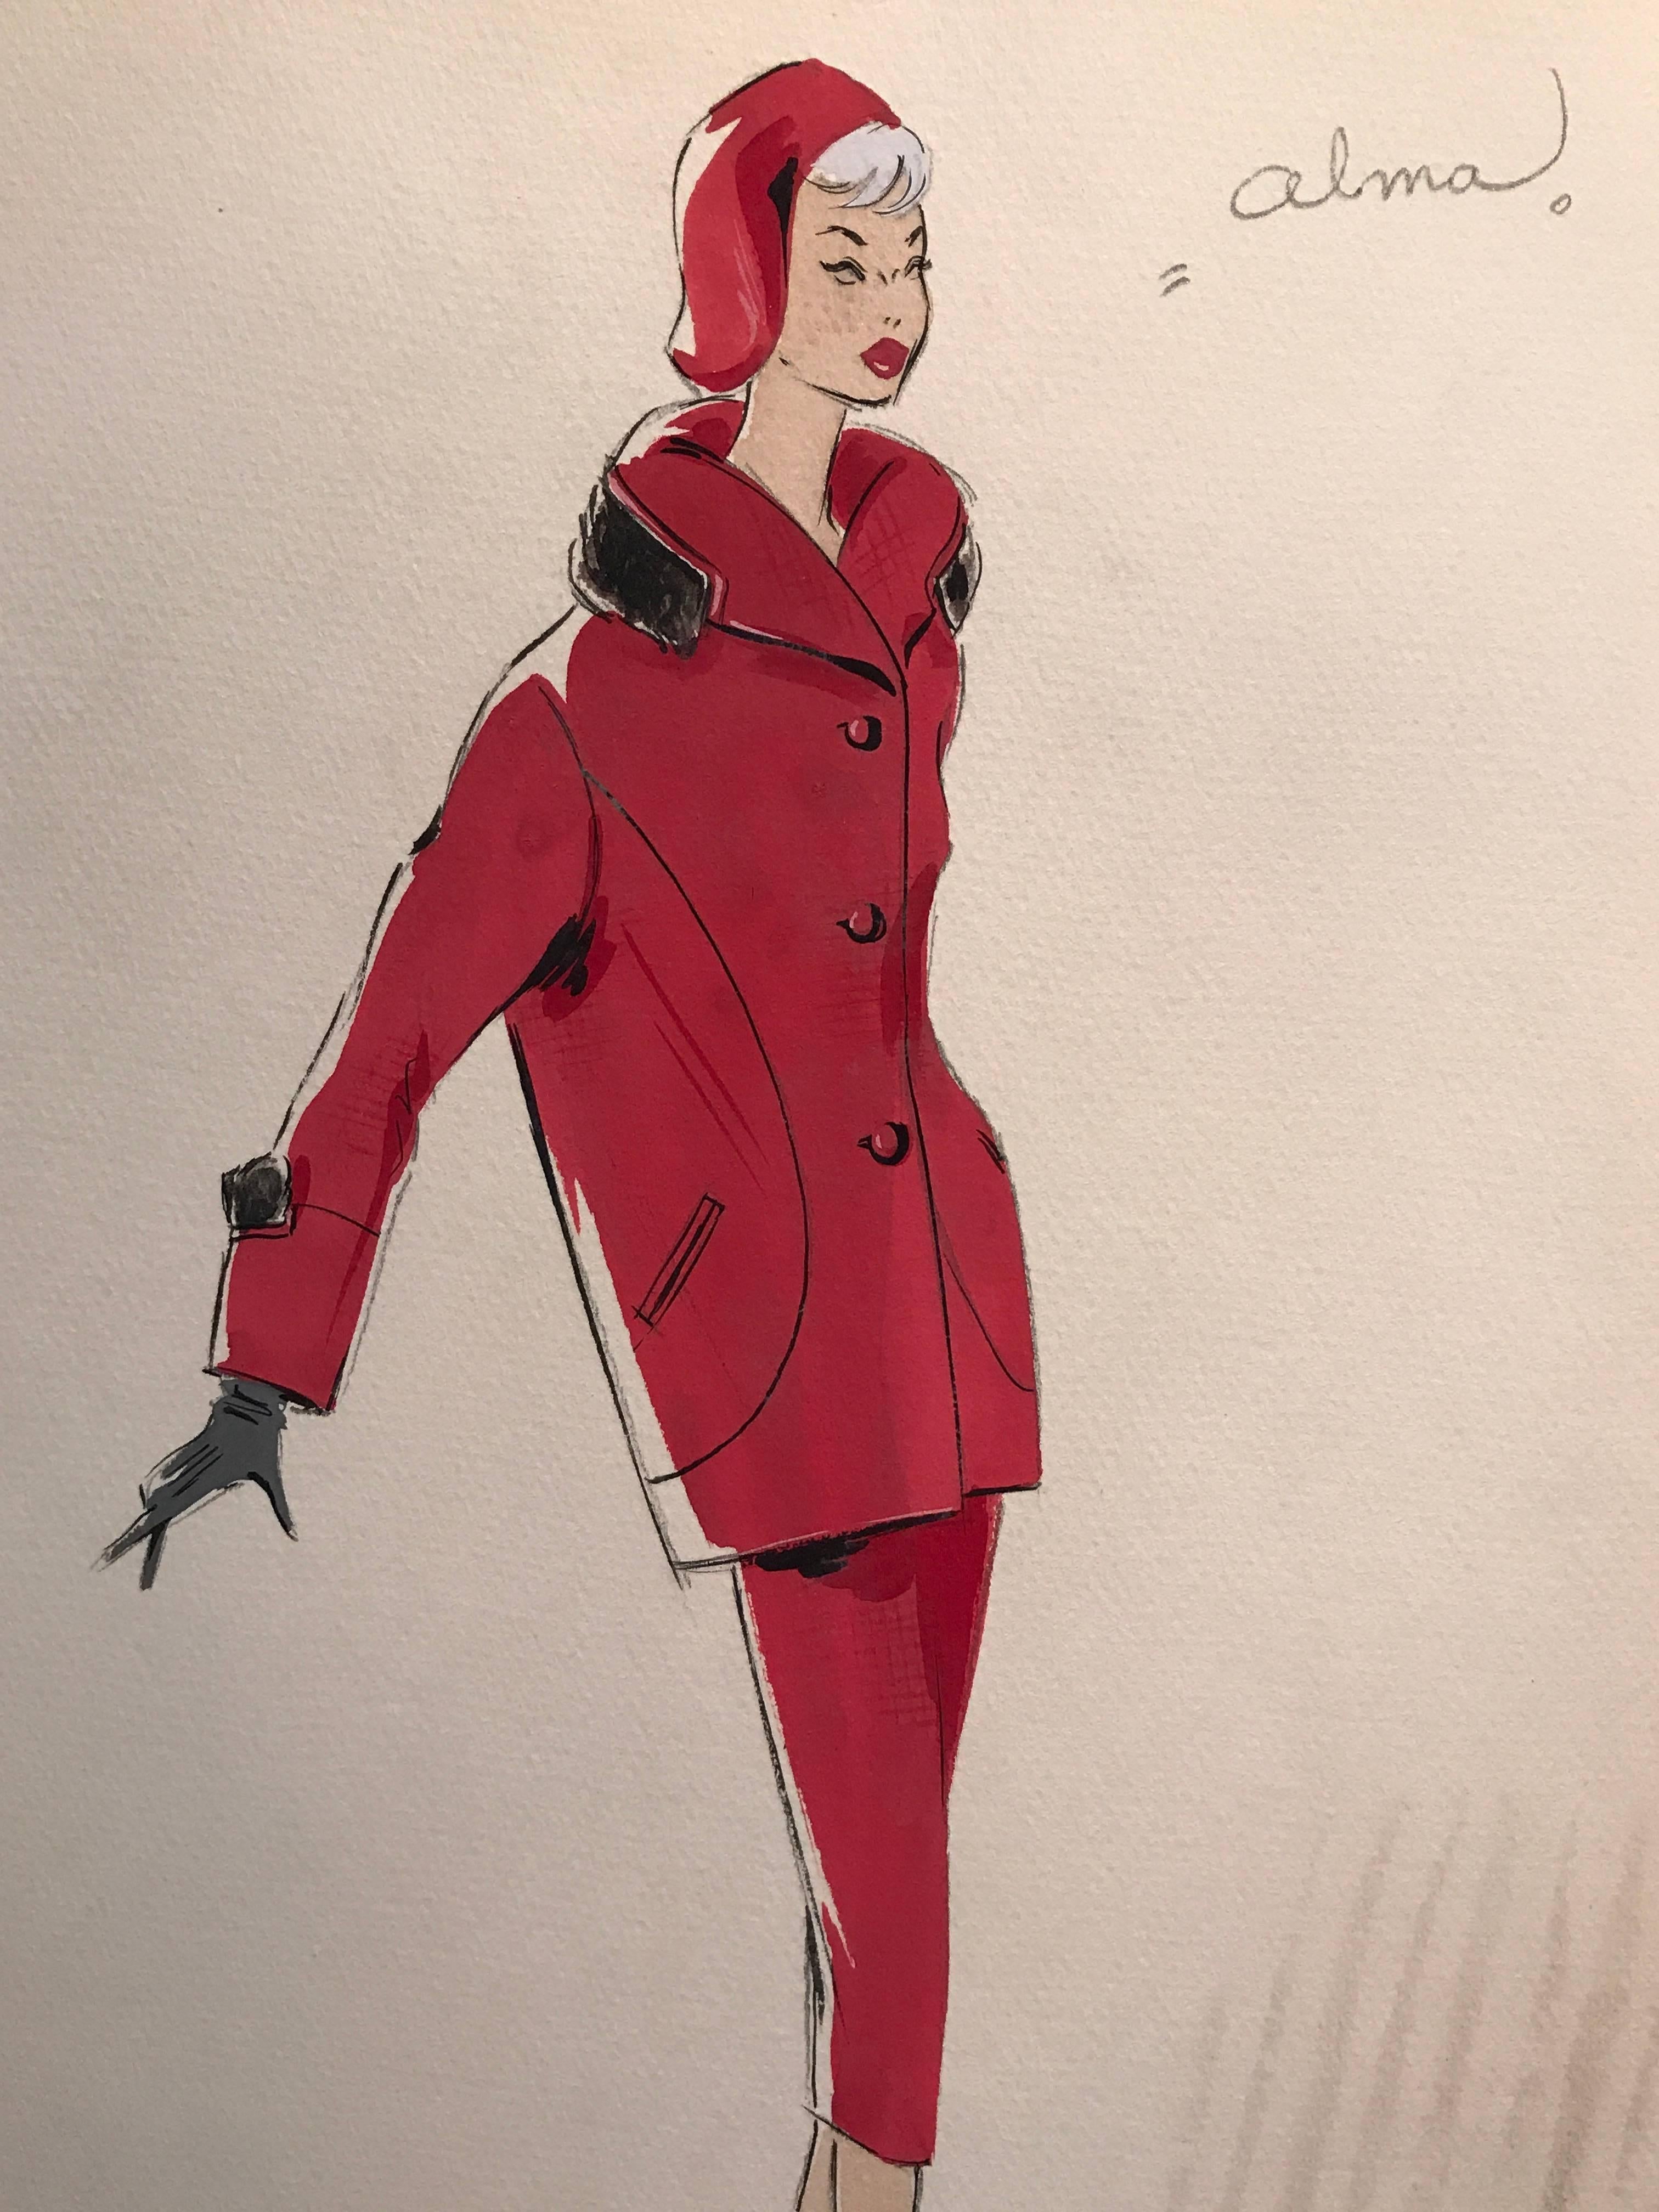 Lady in Red Original Parisian Fashion Illustration Sketch - Art by Unknown